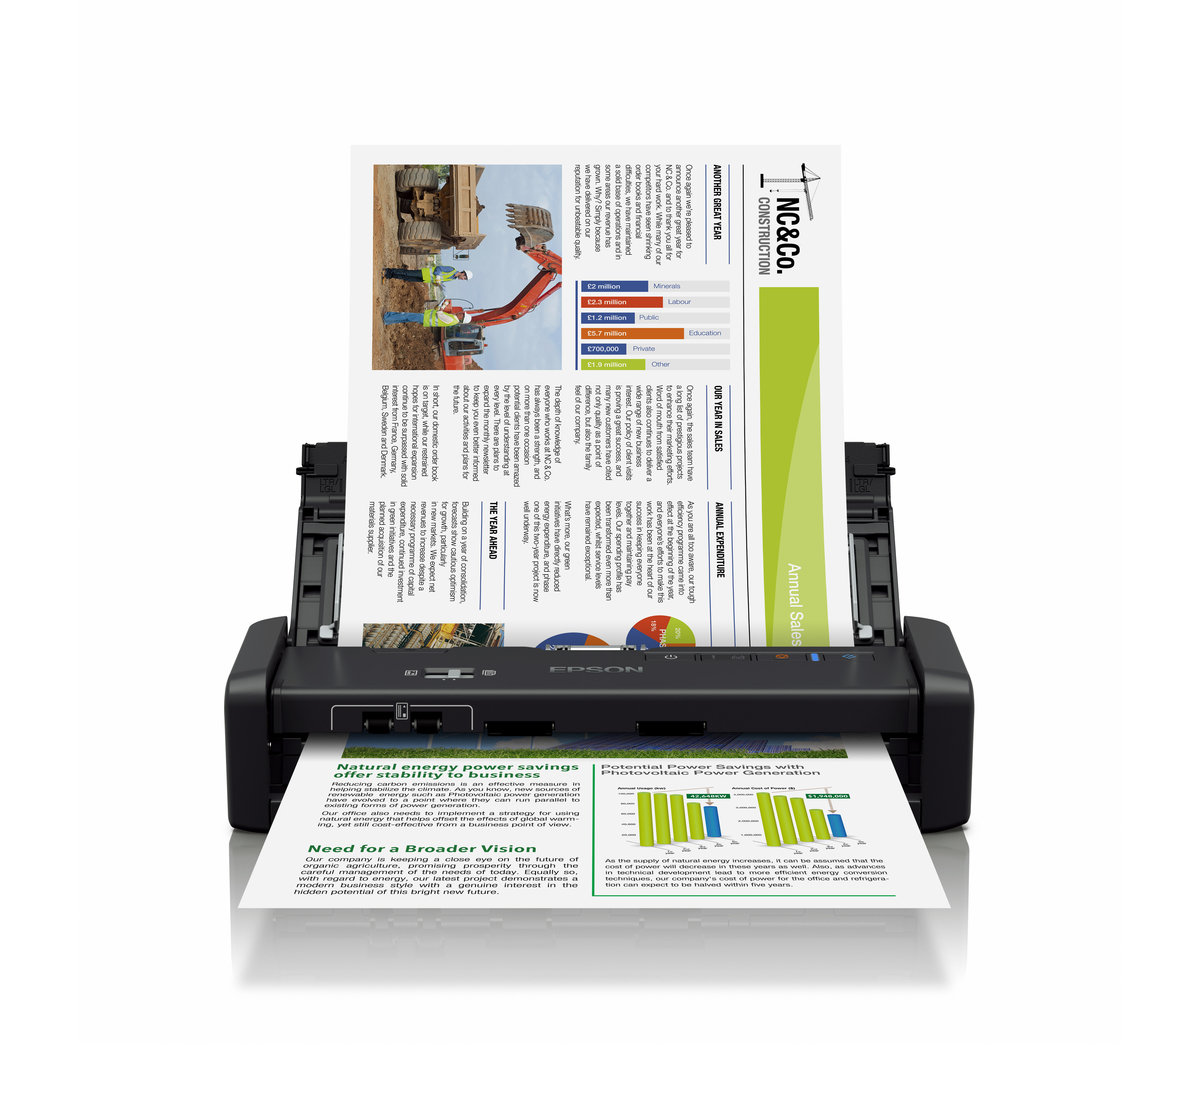 Epson WorkForce DS-360W Wi-Fi Portable Sheet-fed Document Scanner (Pre Order)